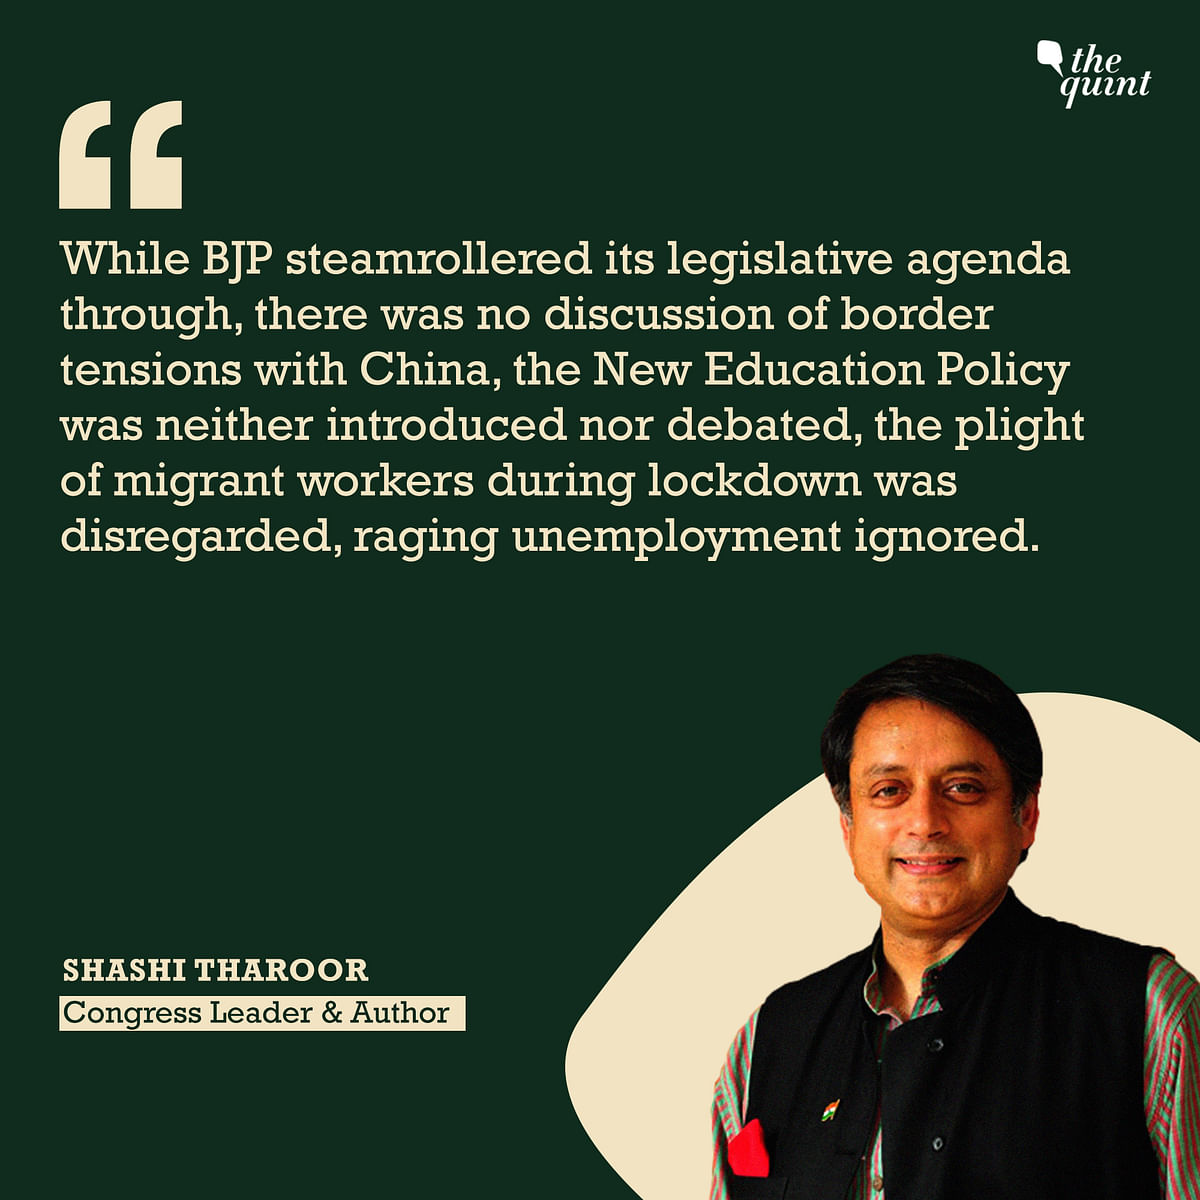 “If the assault on institutions like Parliament persists, people’s confidence will erode,” writes Dr Shashi Tharoor.